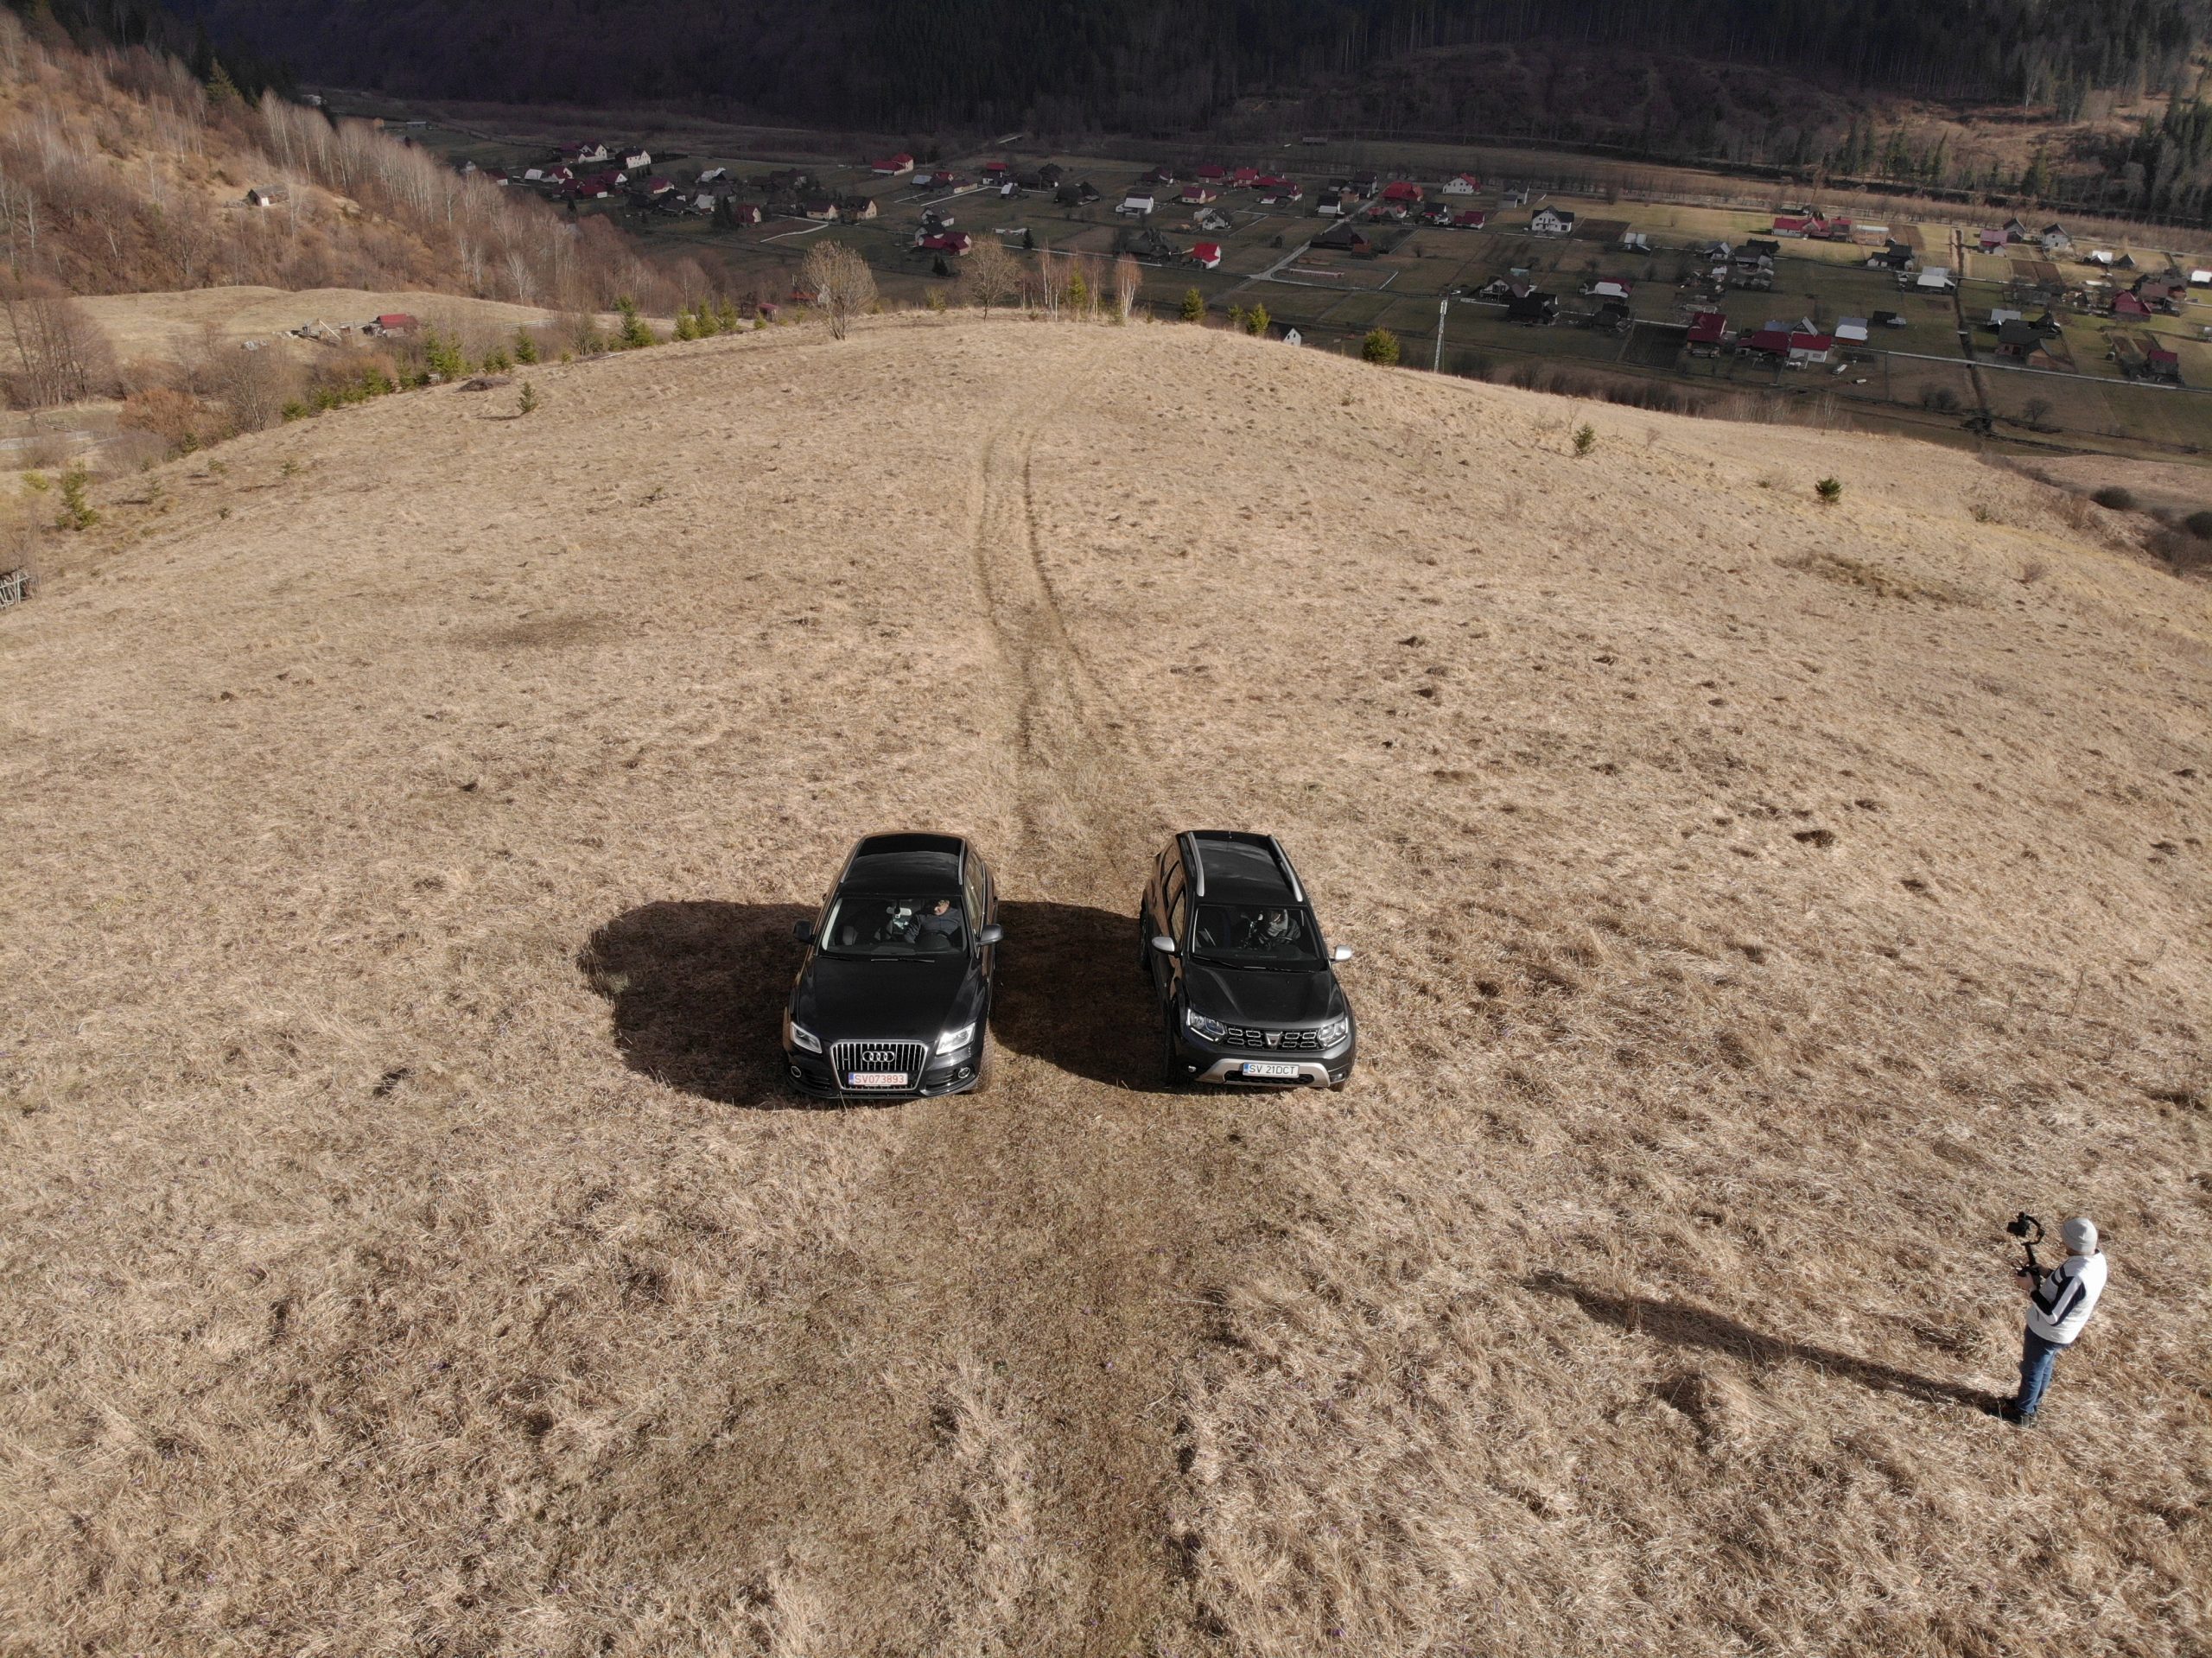 Duster and Audi captured from drone